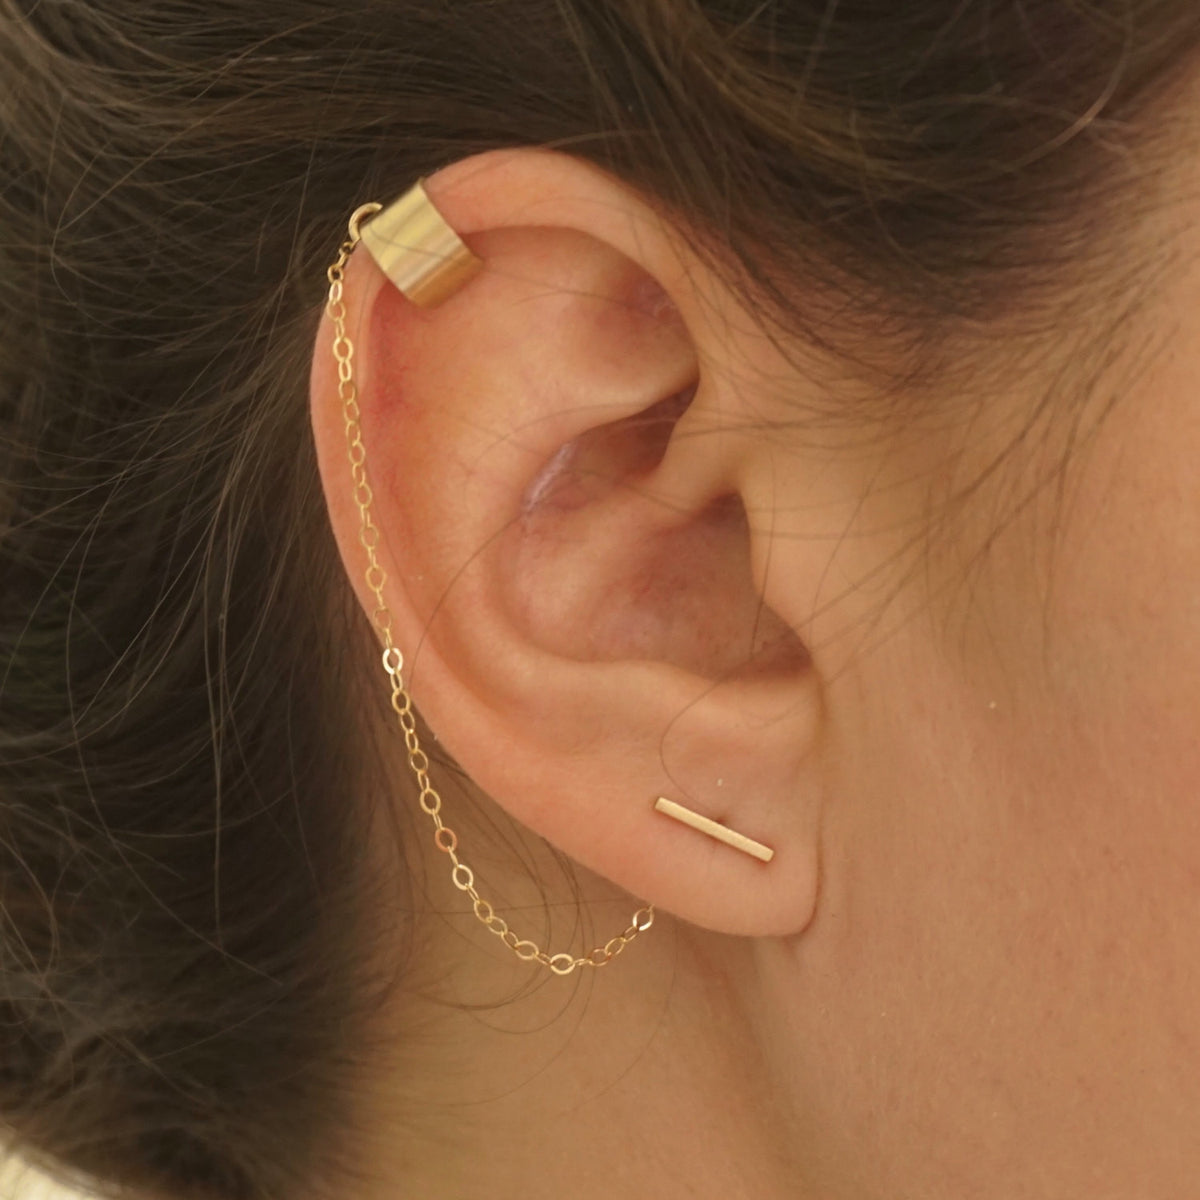 Chic Yet Edgy Hand-Made Staple Bar Stud Earrings With Single Chained Ear Cuff - 0276 - Virginia Wynne Designs